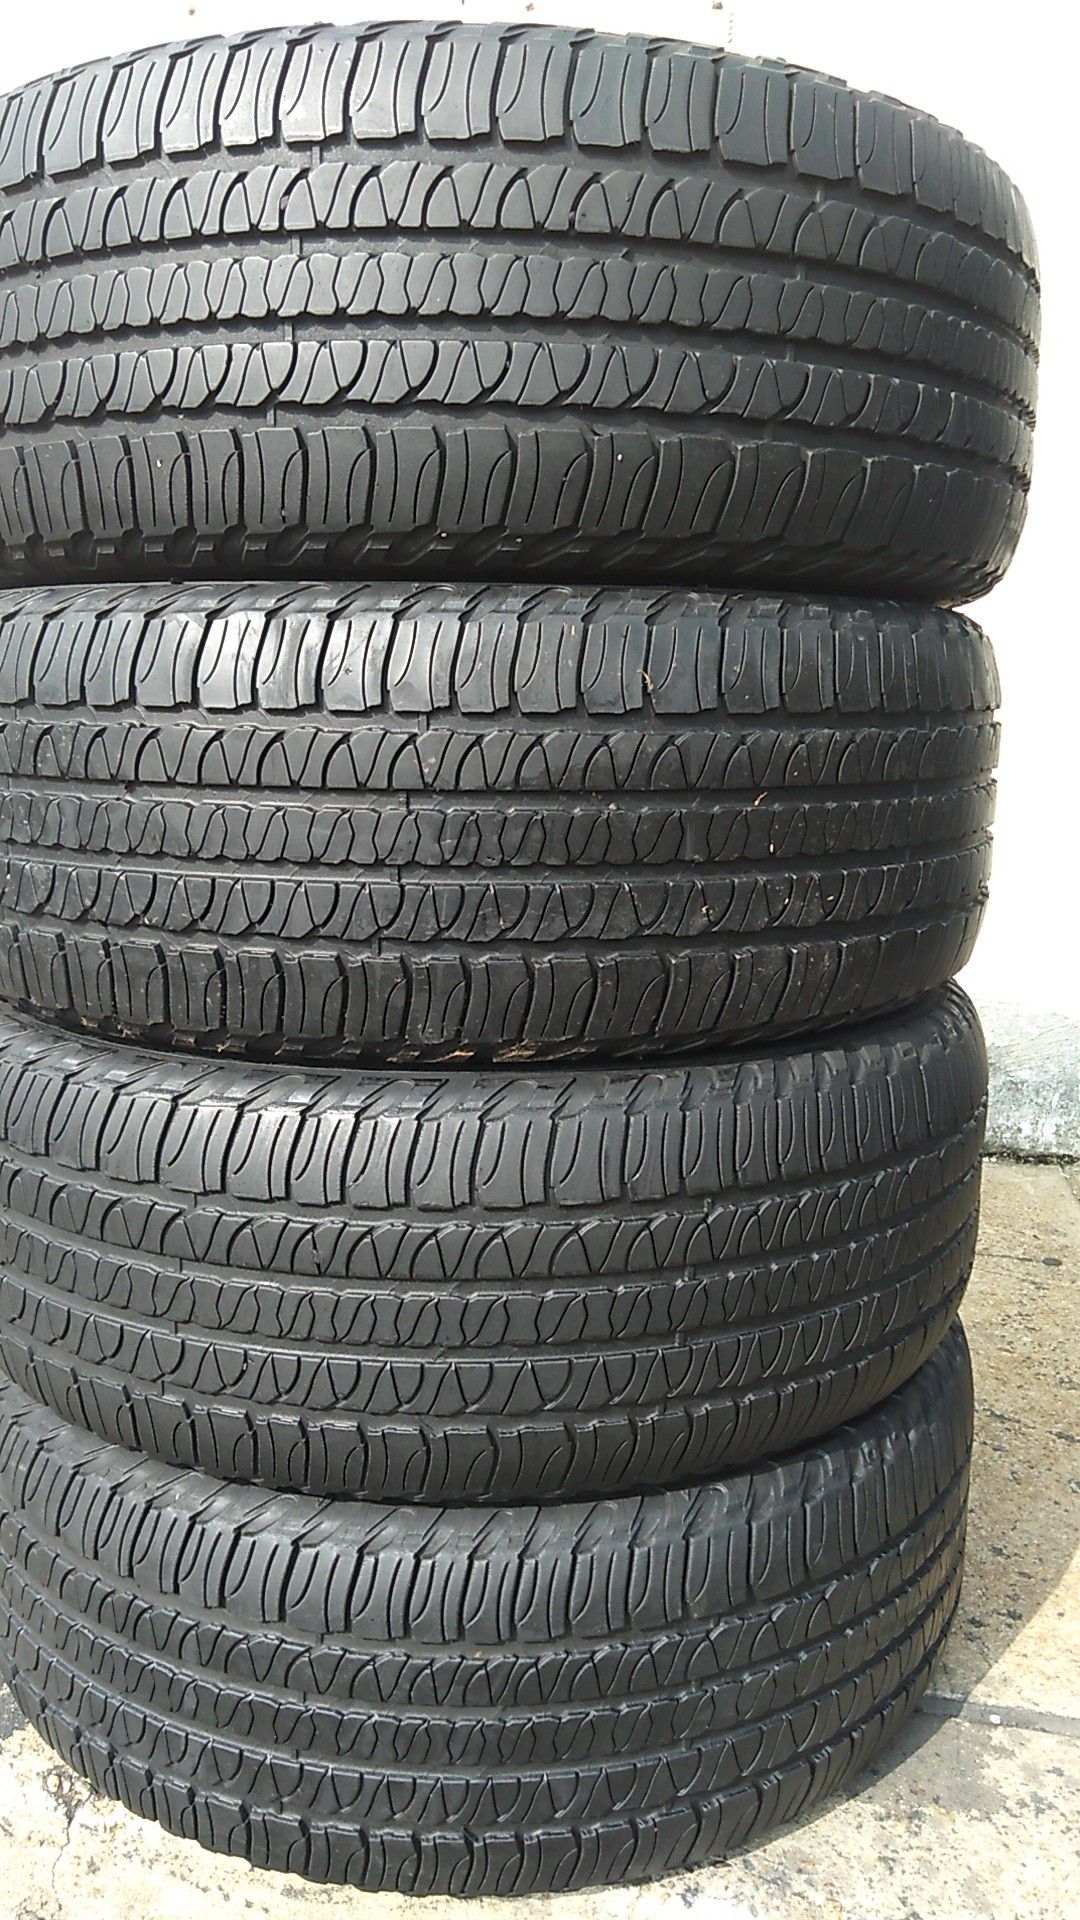 Four matching Goodyear tires for sale 245/65/17